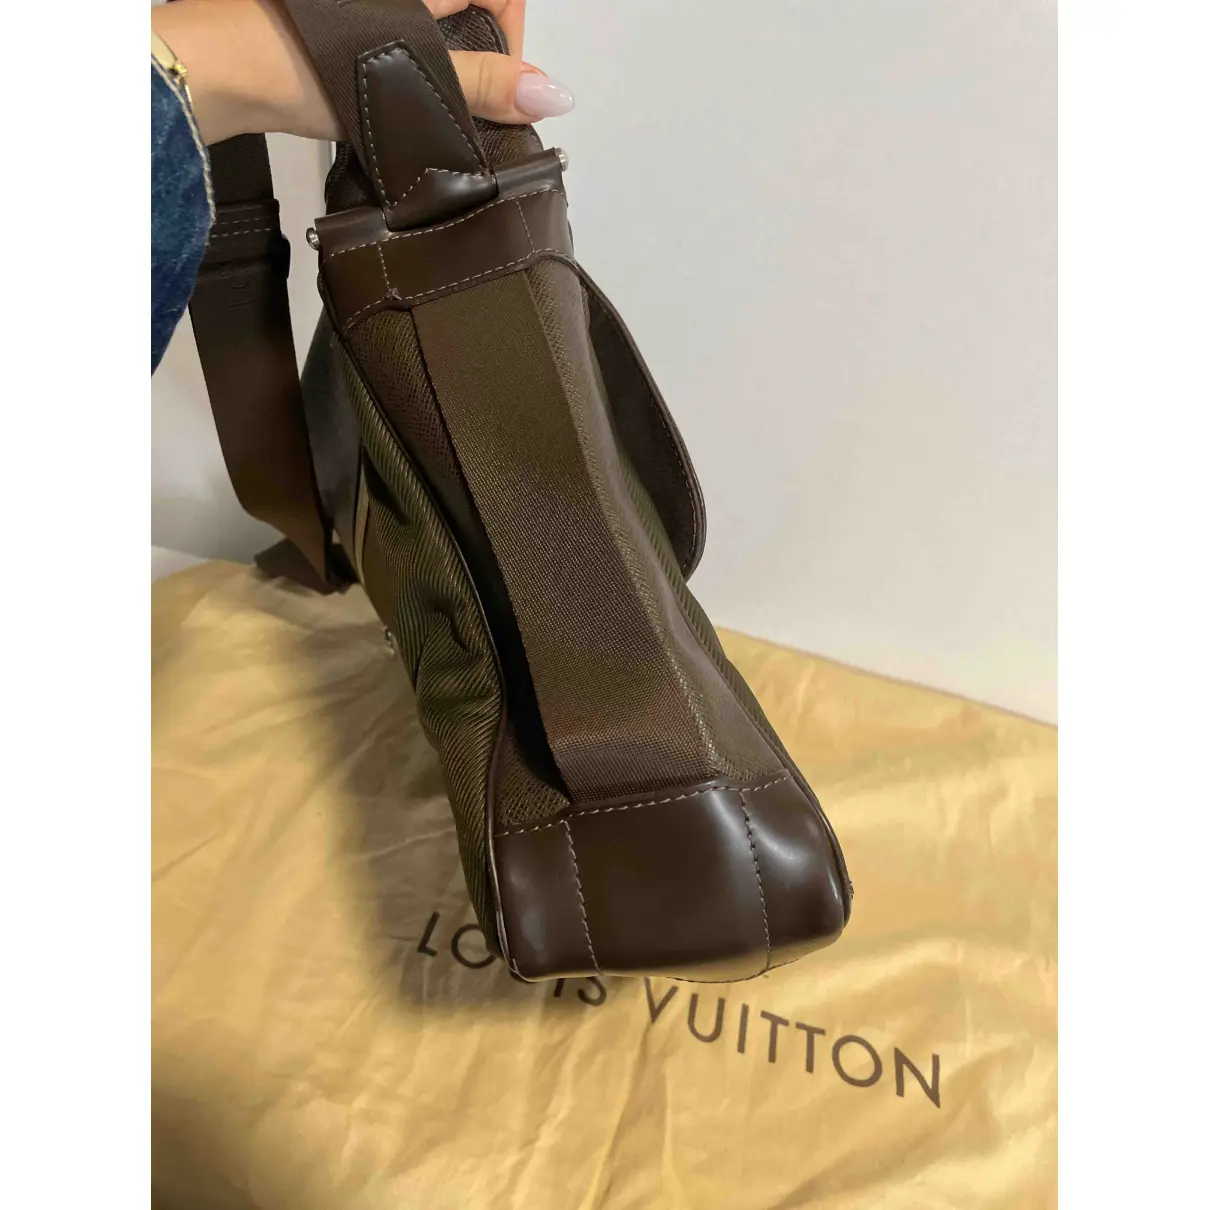 Leather weekend bag Louis Vuitton